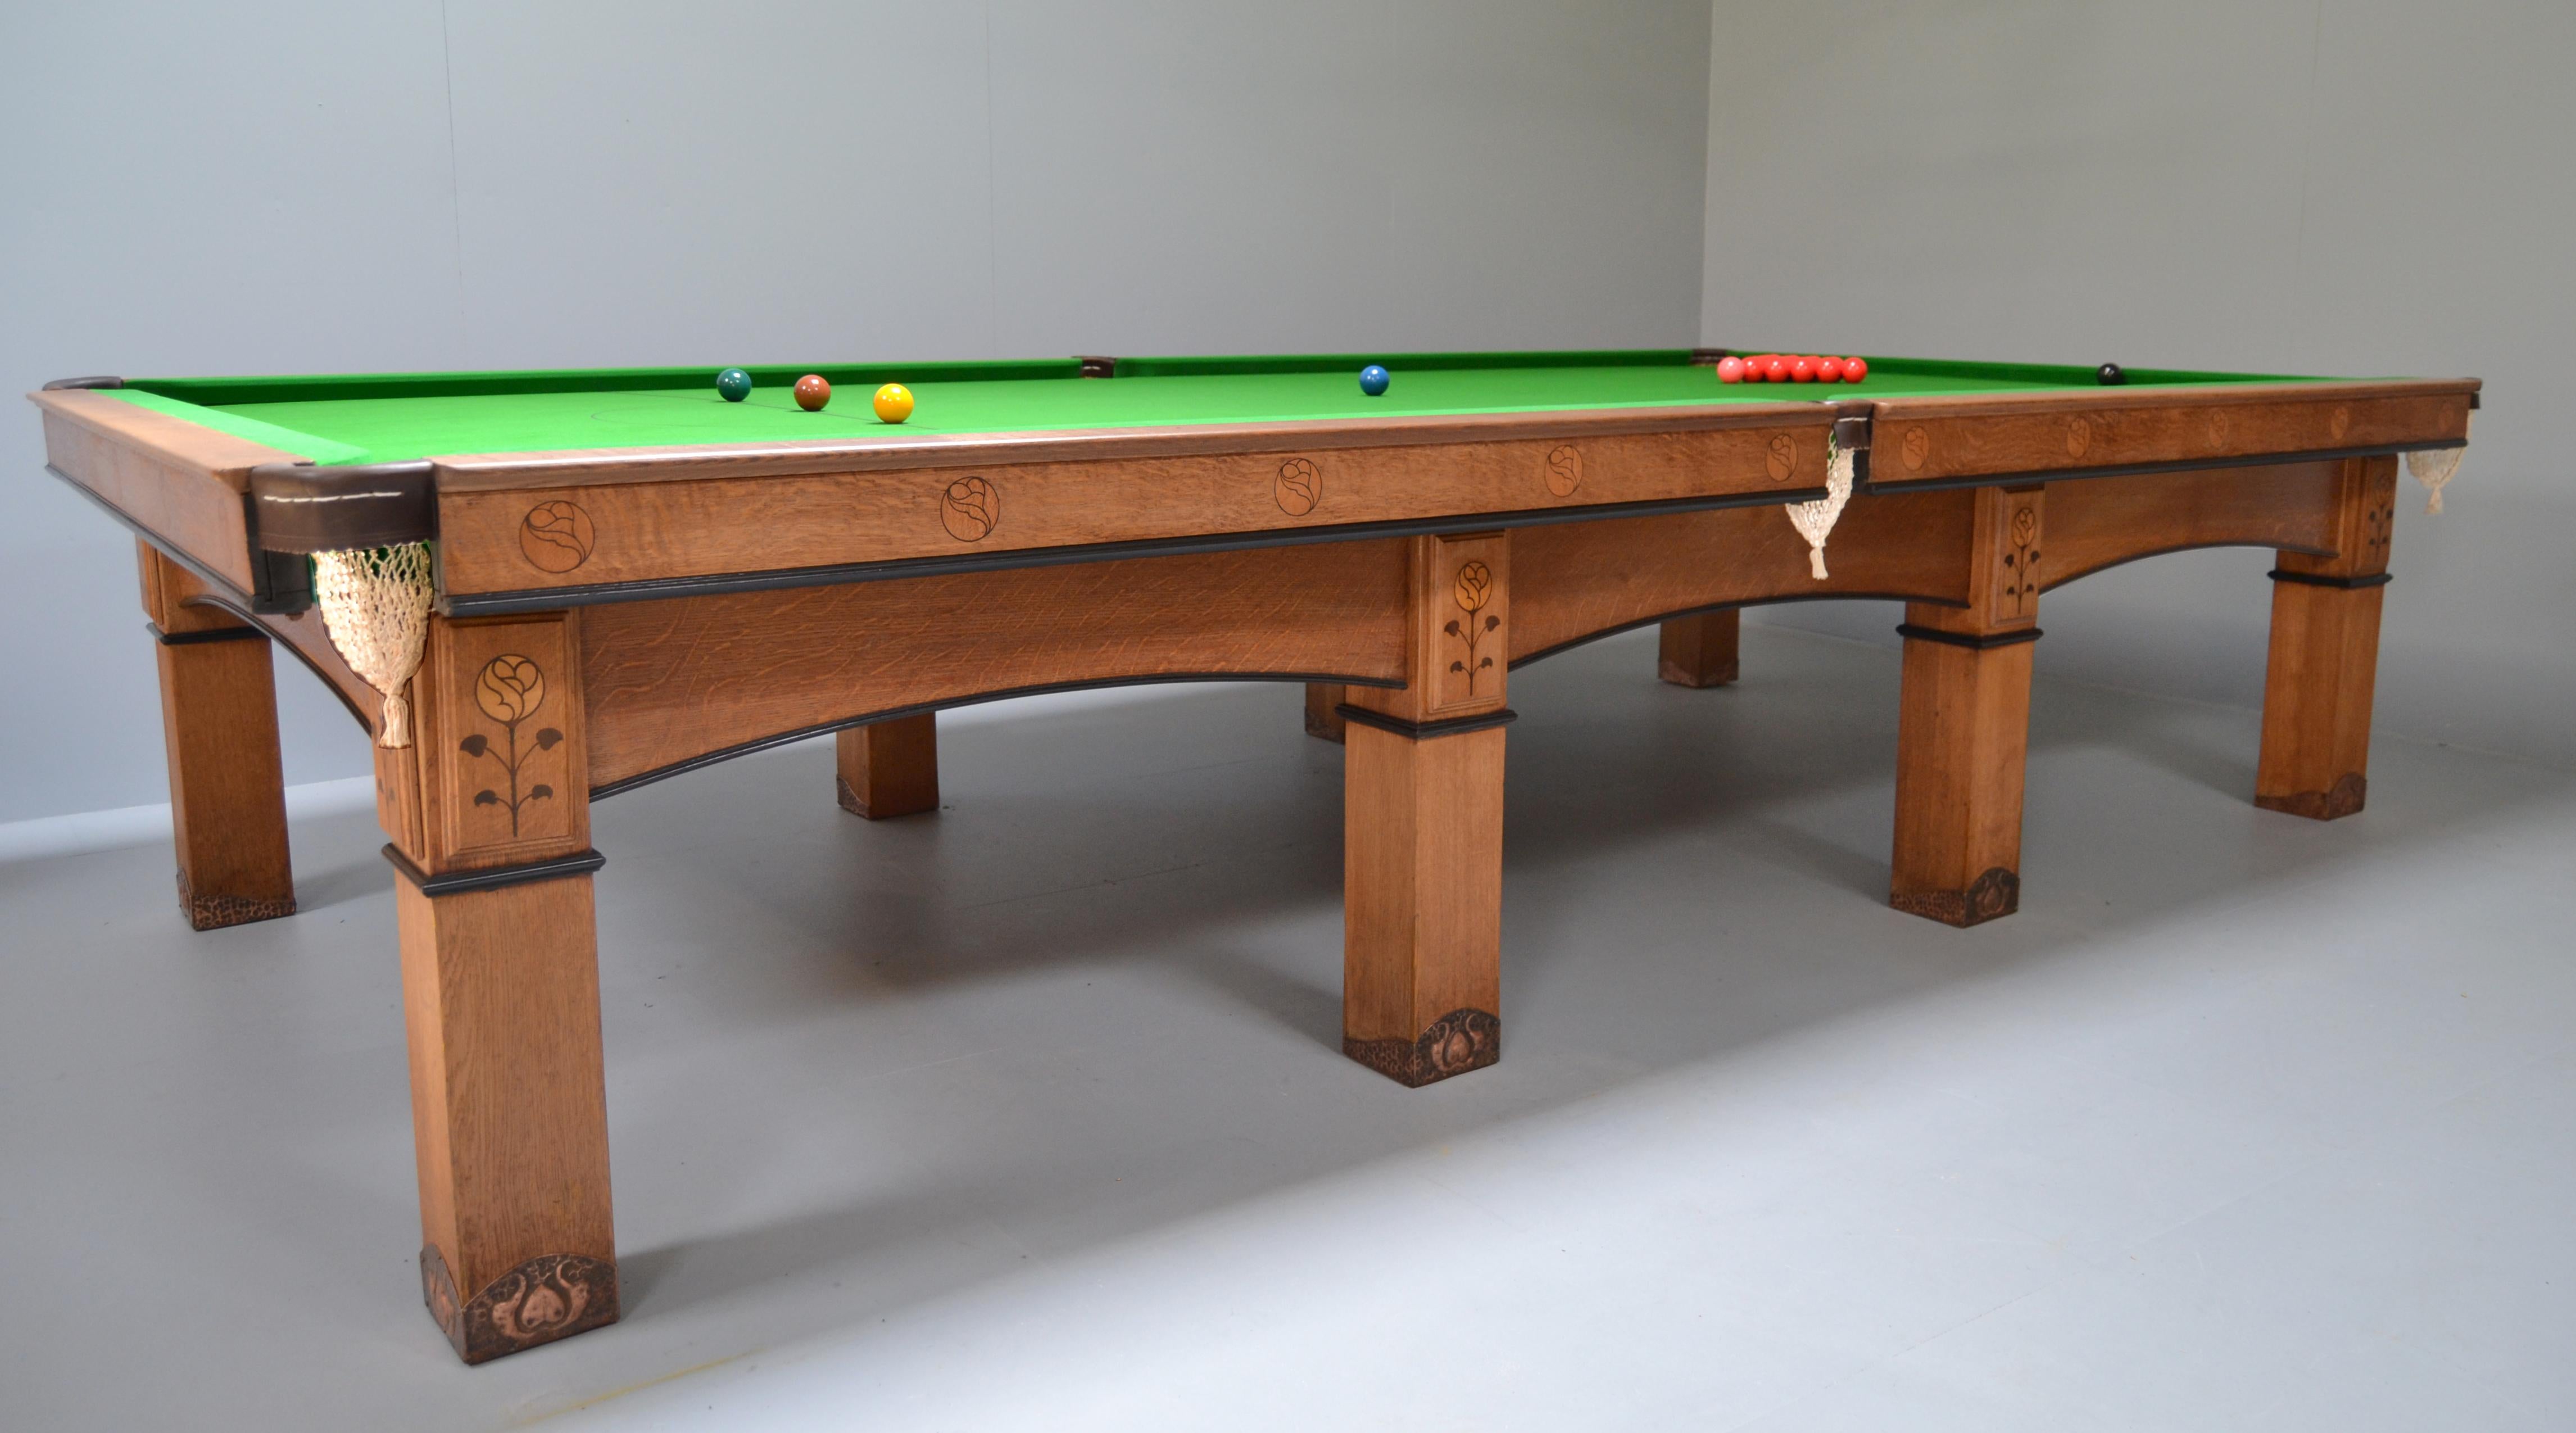 Billiard snooker pool table oak inlaid arts and crafts glasgow school scotland For Sale 5